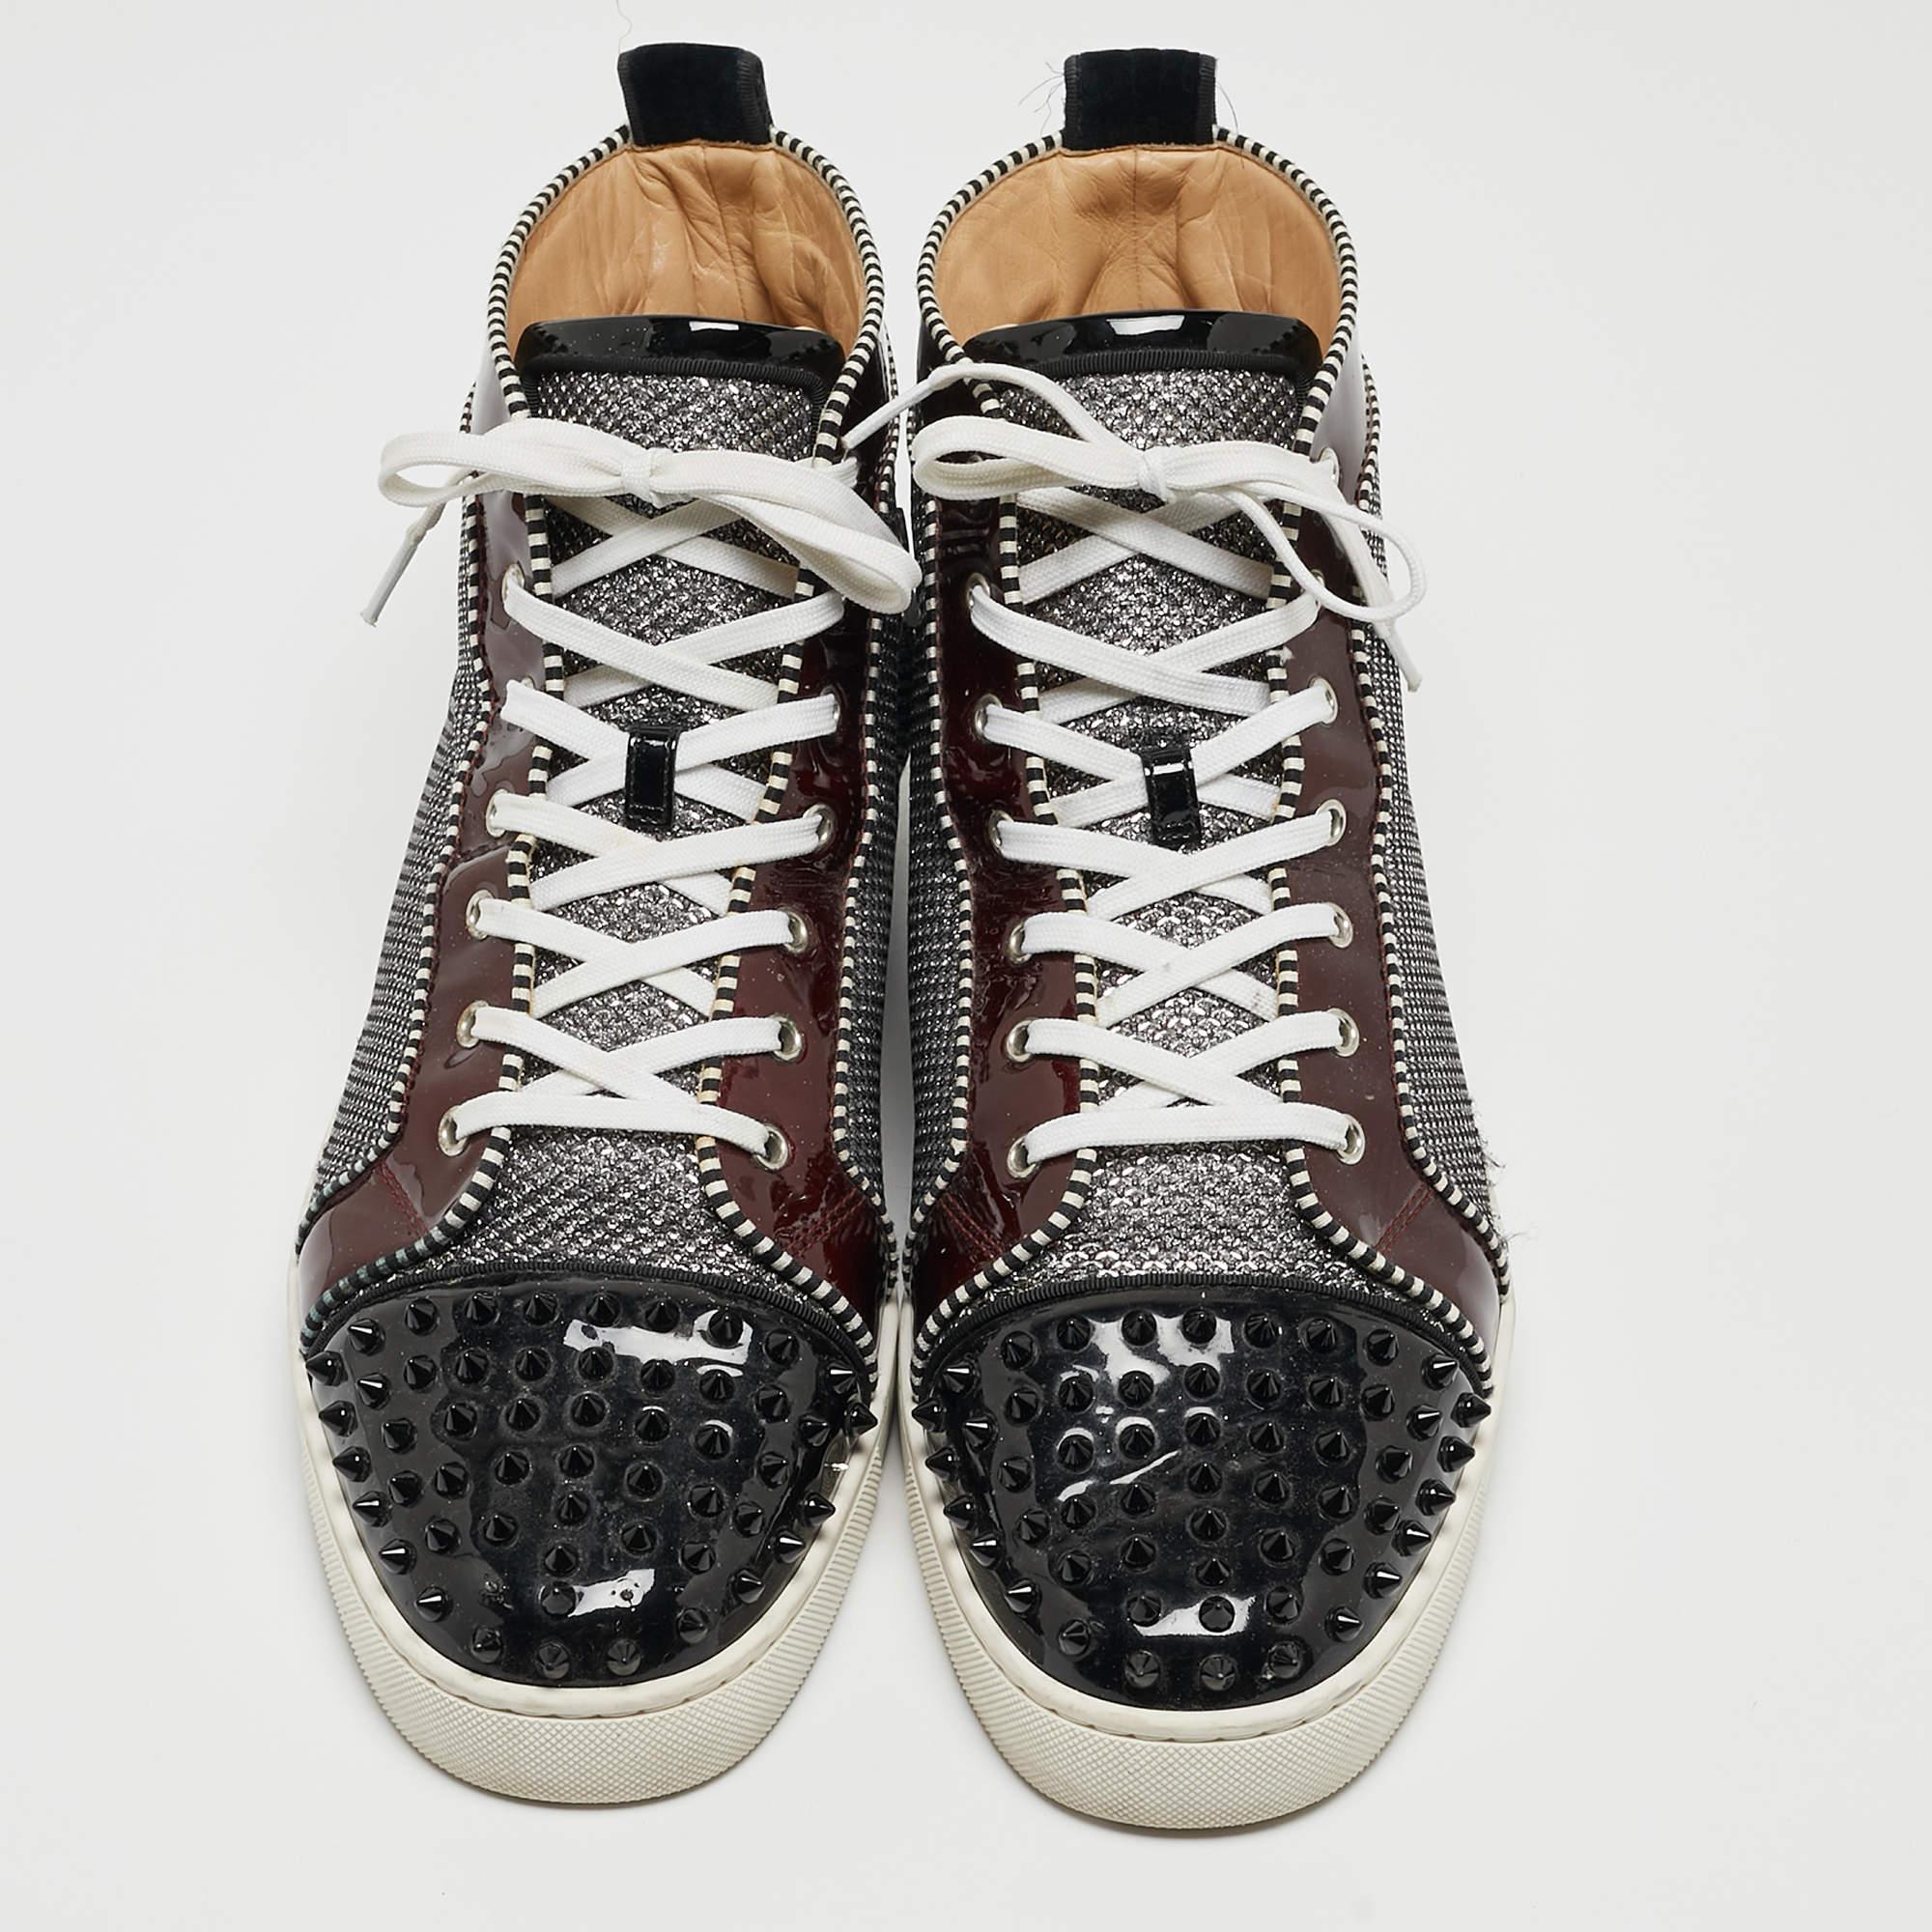 Presented in a classic silhouette, these Christian Louboutin sneakers are a seamless combination of luxury, comfort, and style. These sneakers are designed with signature details and comfortable insoles.

